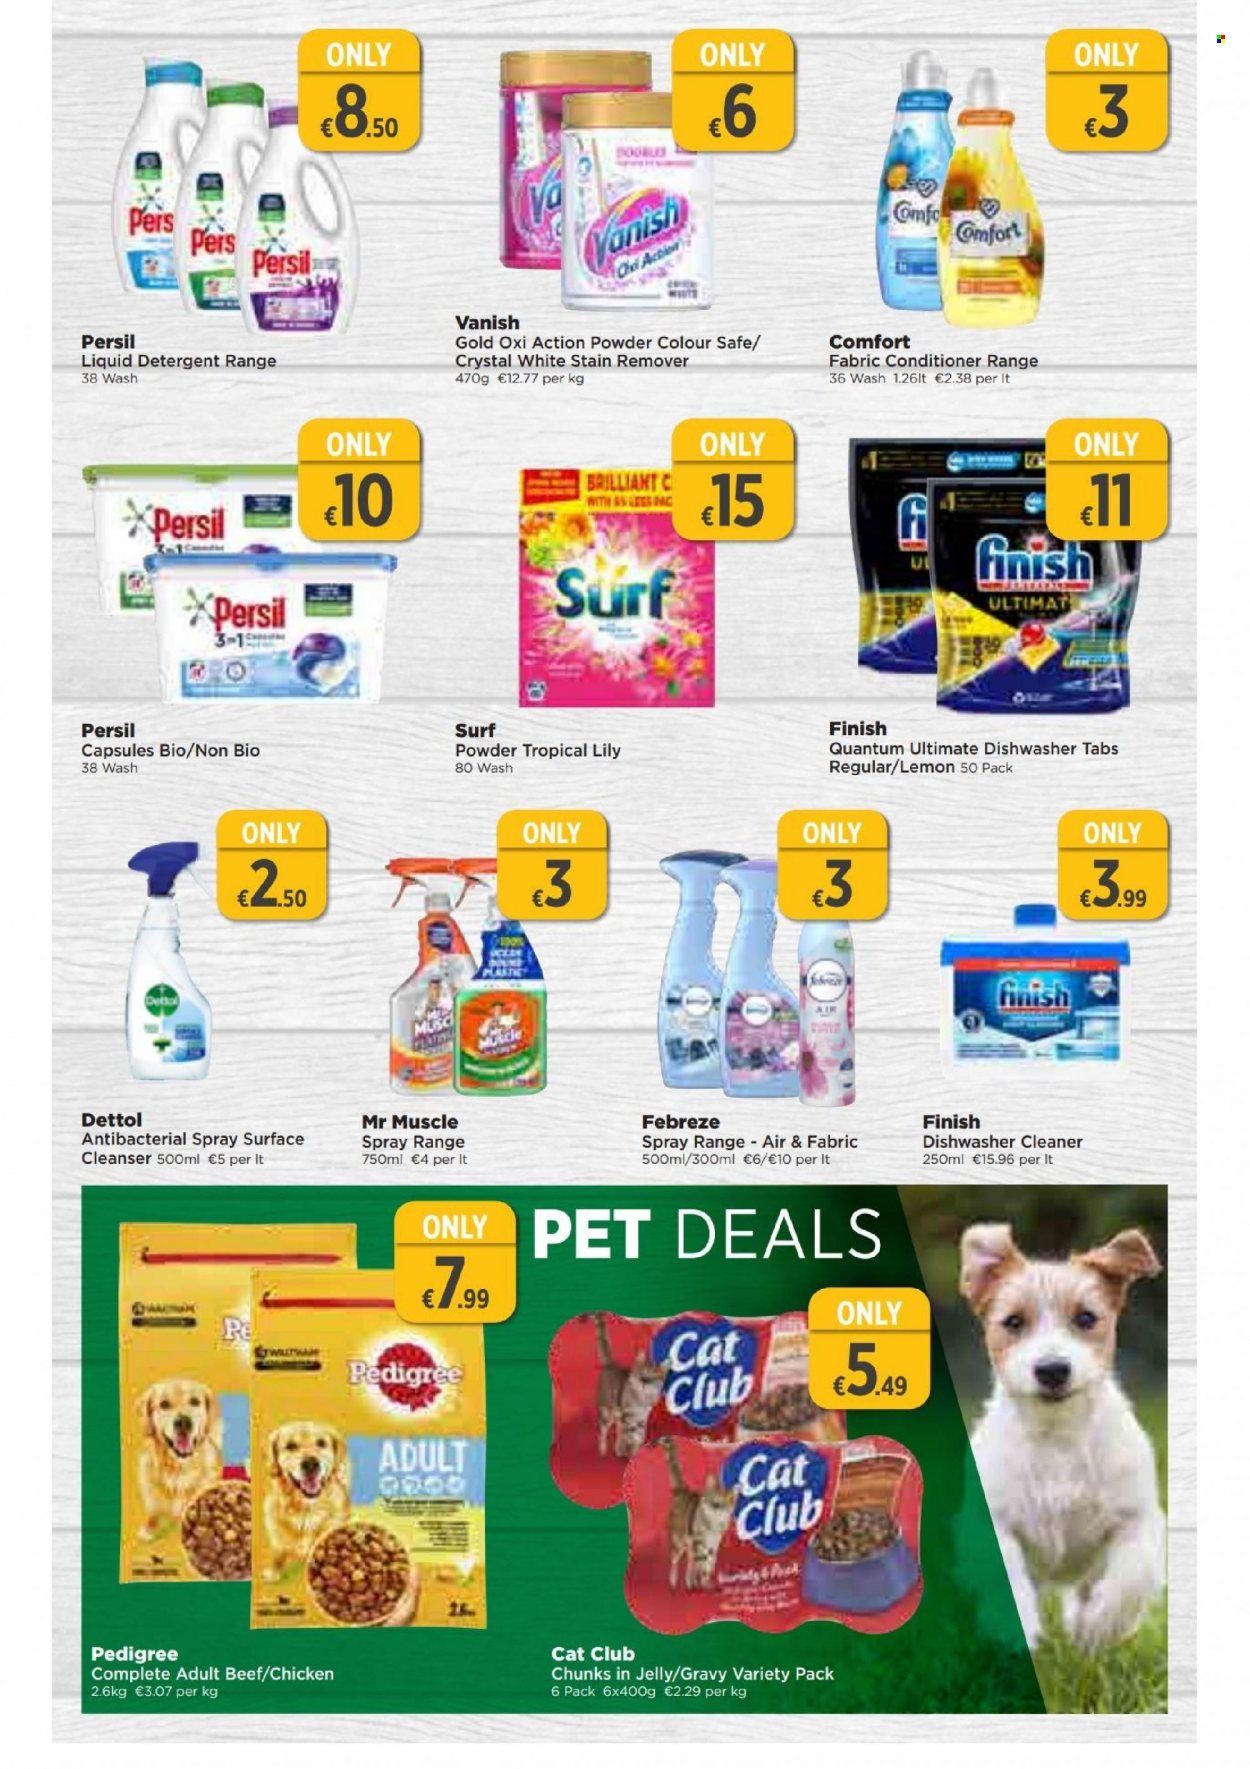 thumbnail - EUROSPAR offer  - 10.11.2022 - 30.11.2022 - Sales products - Dettol, detergent, Febreze, cleaner, stain remover, Vanish, Mr. Muscle, Persil, liquid detergent, Comfort softener, dishwashing liquid, dishwasher cleaner, Finish Powerball, Finish Quantum Ultimate, cleanser, antibacterial spray, Pedigree. Page 13.